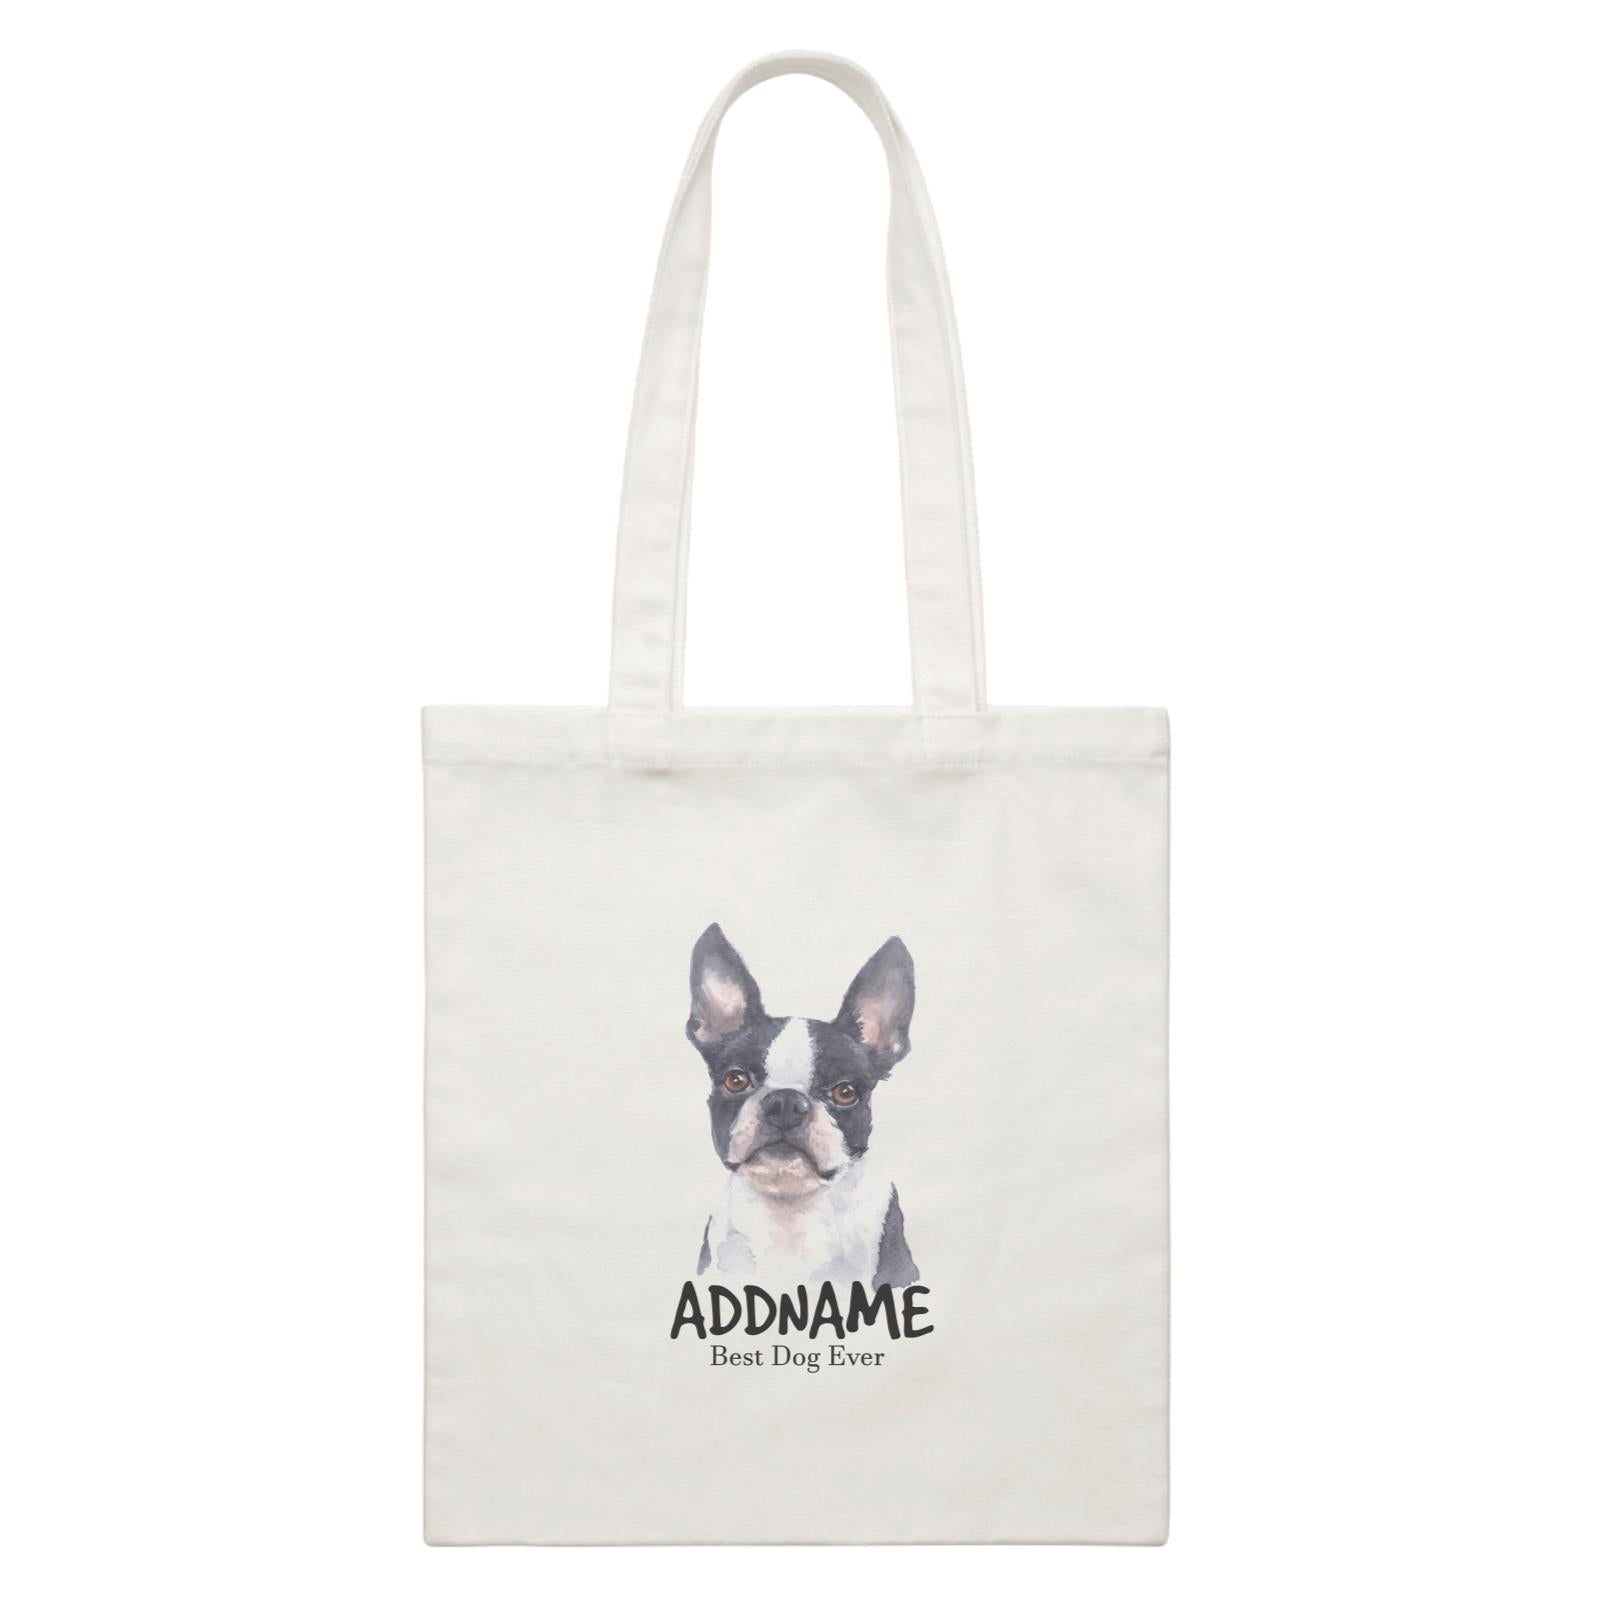 Watercolor Dog Boston Terrier Front Best Dog Ever Addname White Canvas Bag